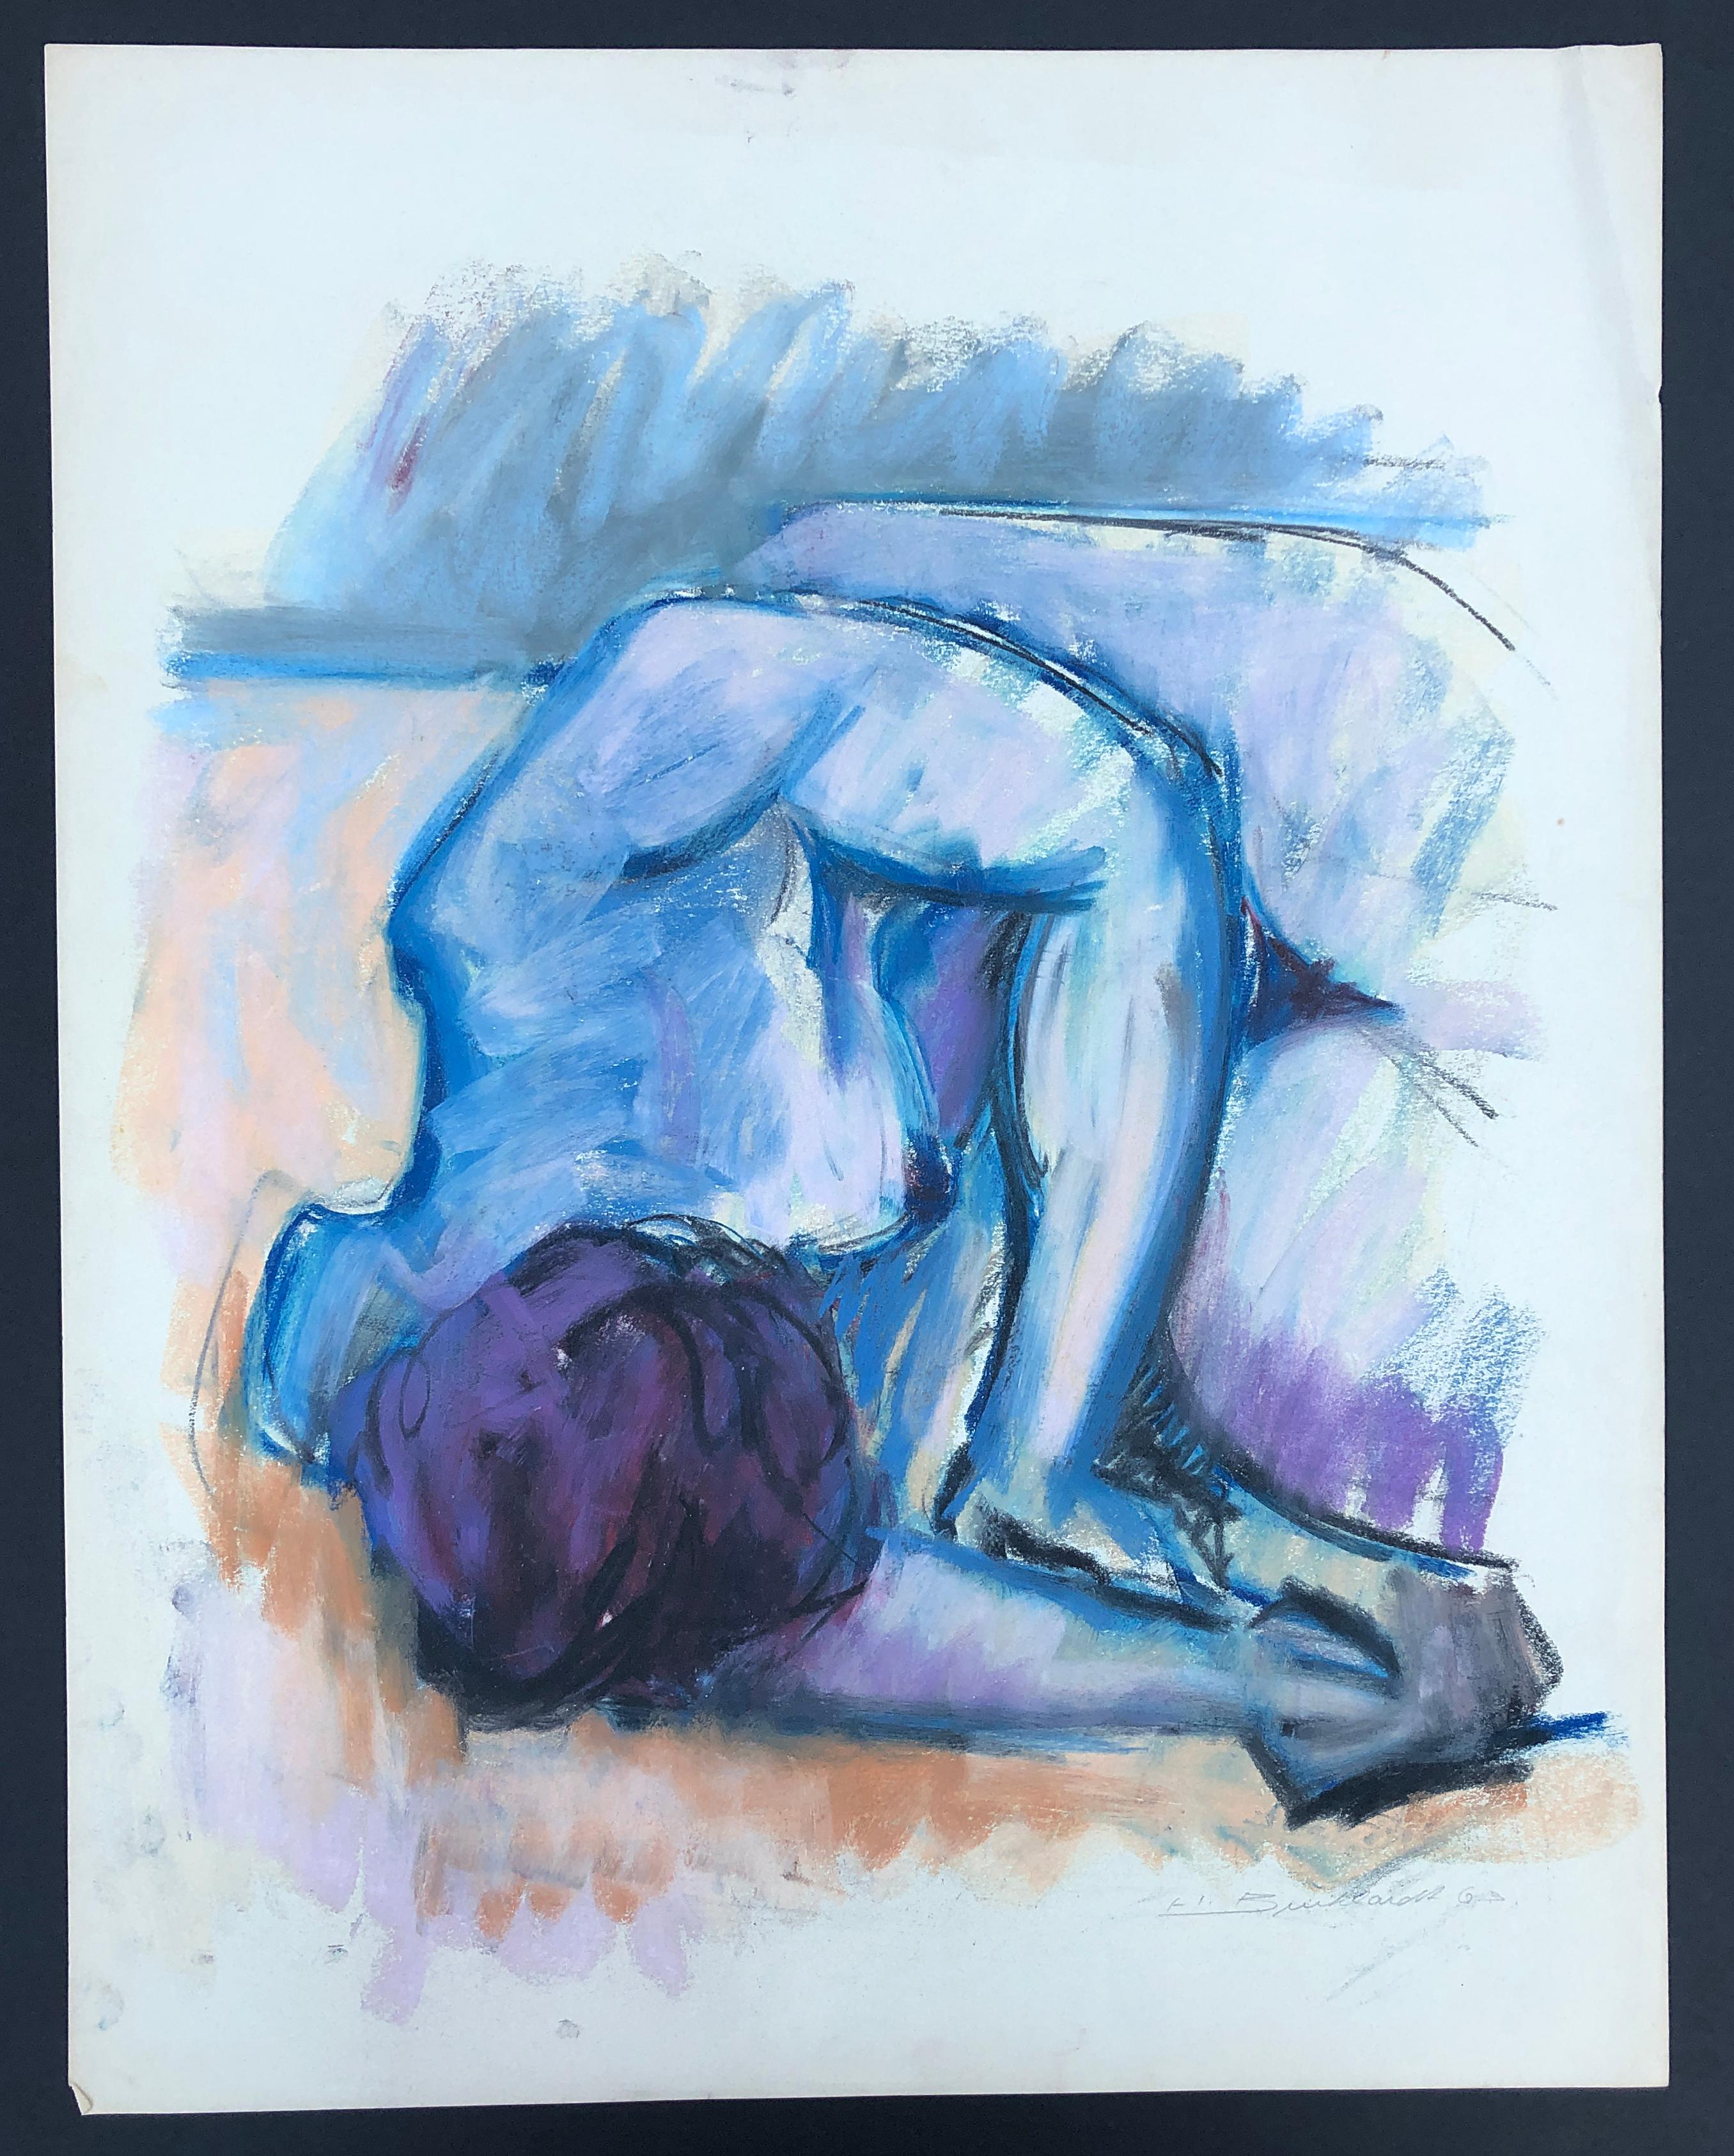 Hans Burkhardt regularly used live models for his figural pastels, which he maintained an interest in throughout his long career.

Untitled (1963)
Pastel on paper
24" x 19"
Signed and dated "H Burkhardt 64" lower right.

Provenance: The artist to